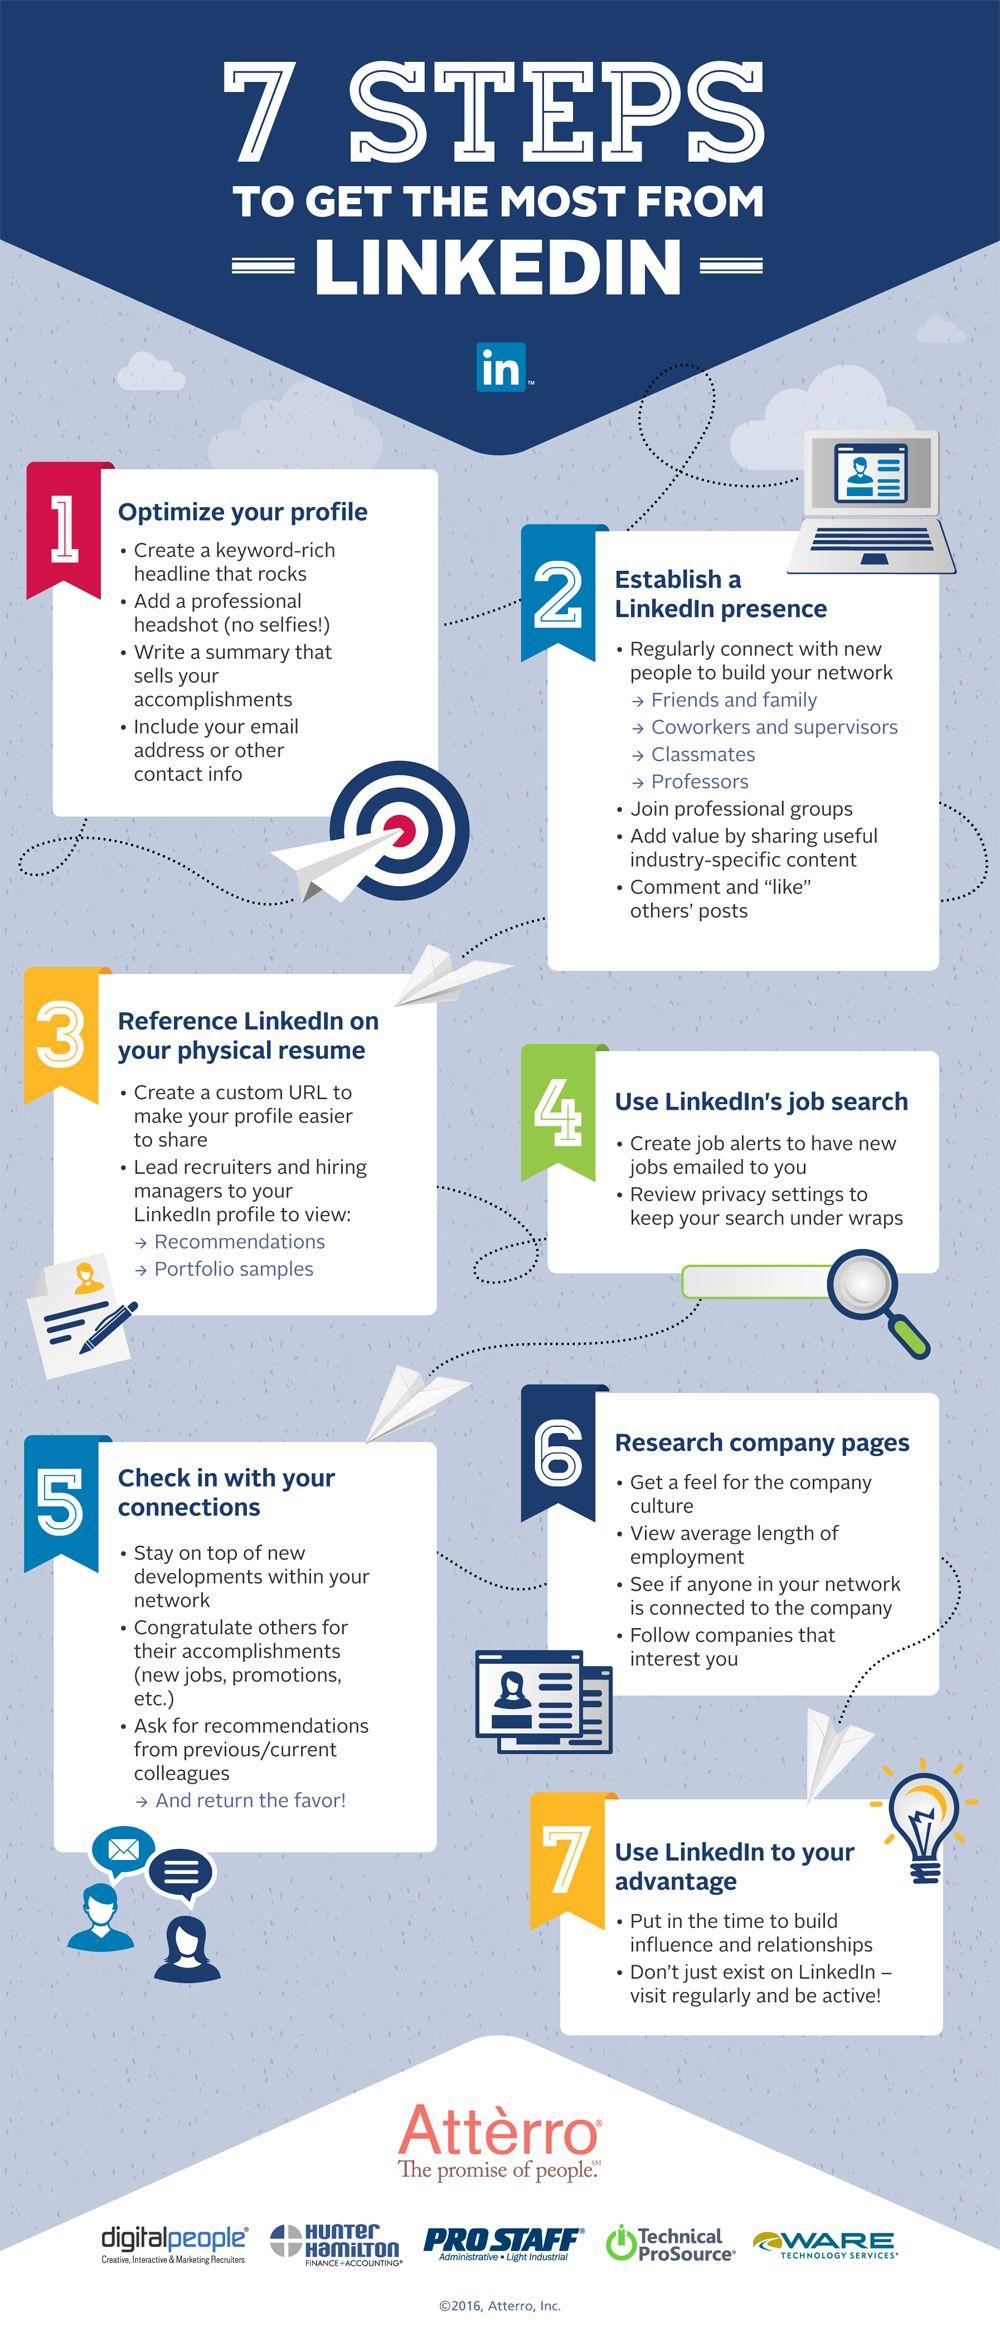 Atterro Logo - 7 Steps to Get the Most from LinkedIn | Digital People